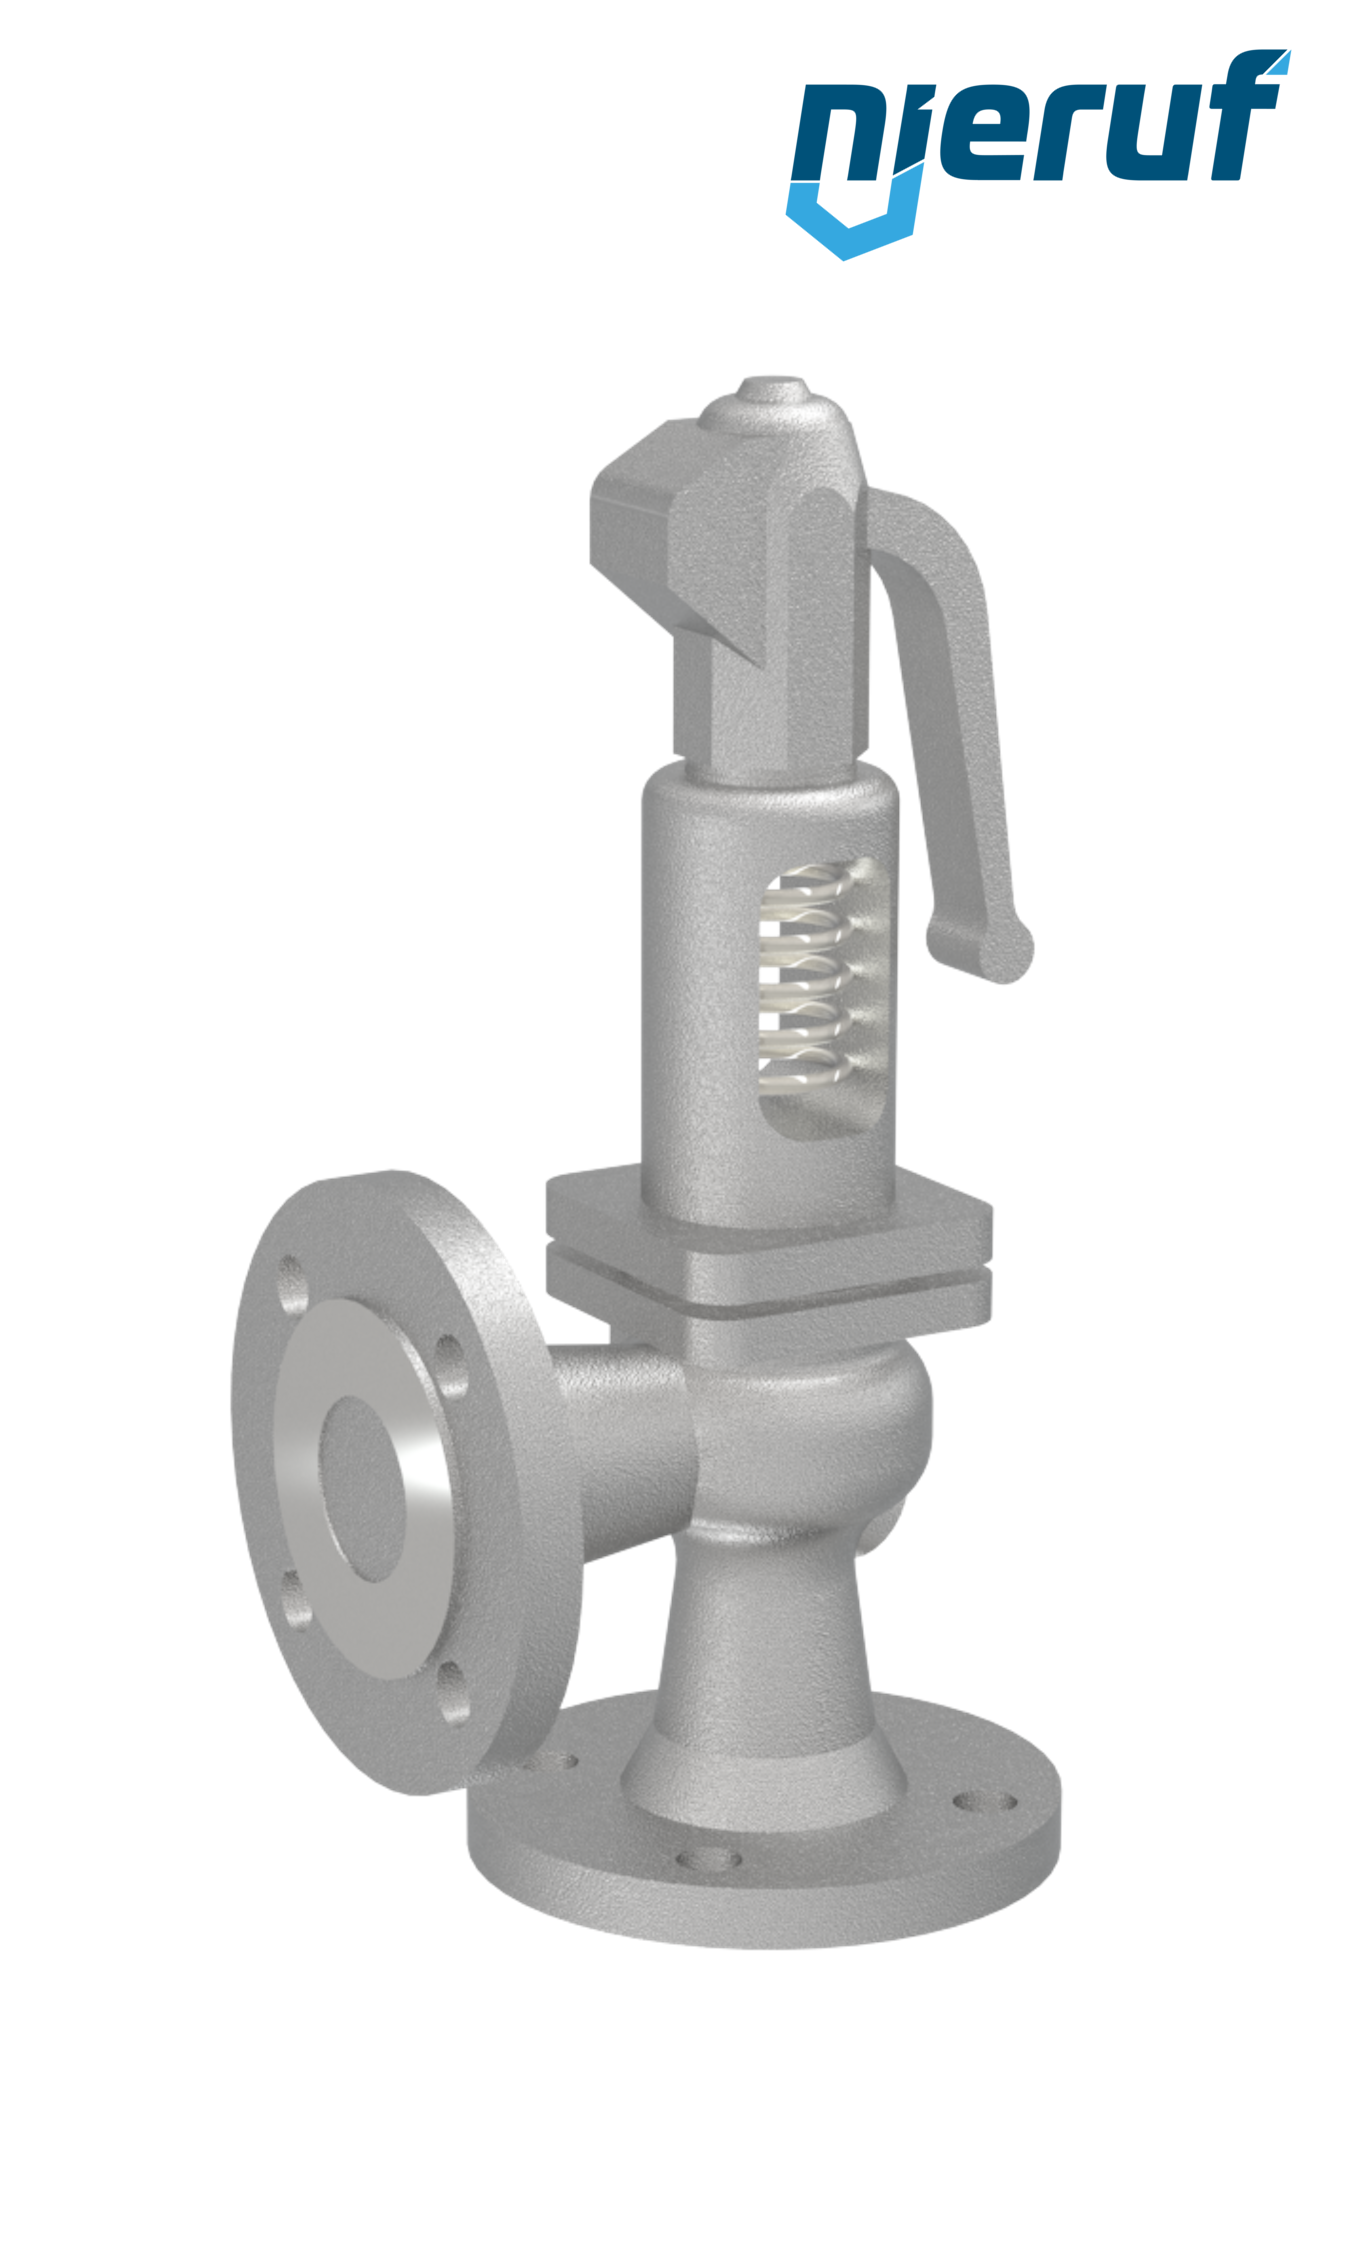 flange-safety valve DN40/DN40 SF0202, cast steel FPM, with lever